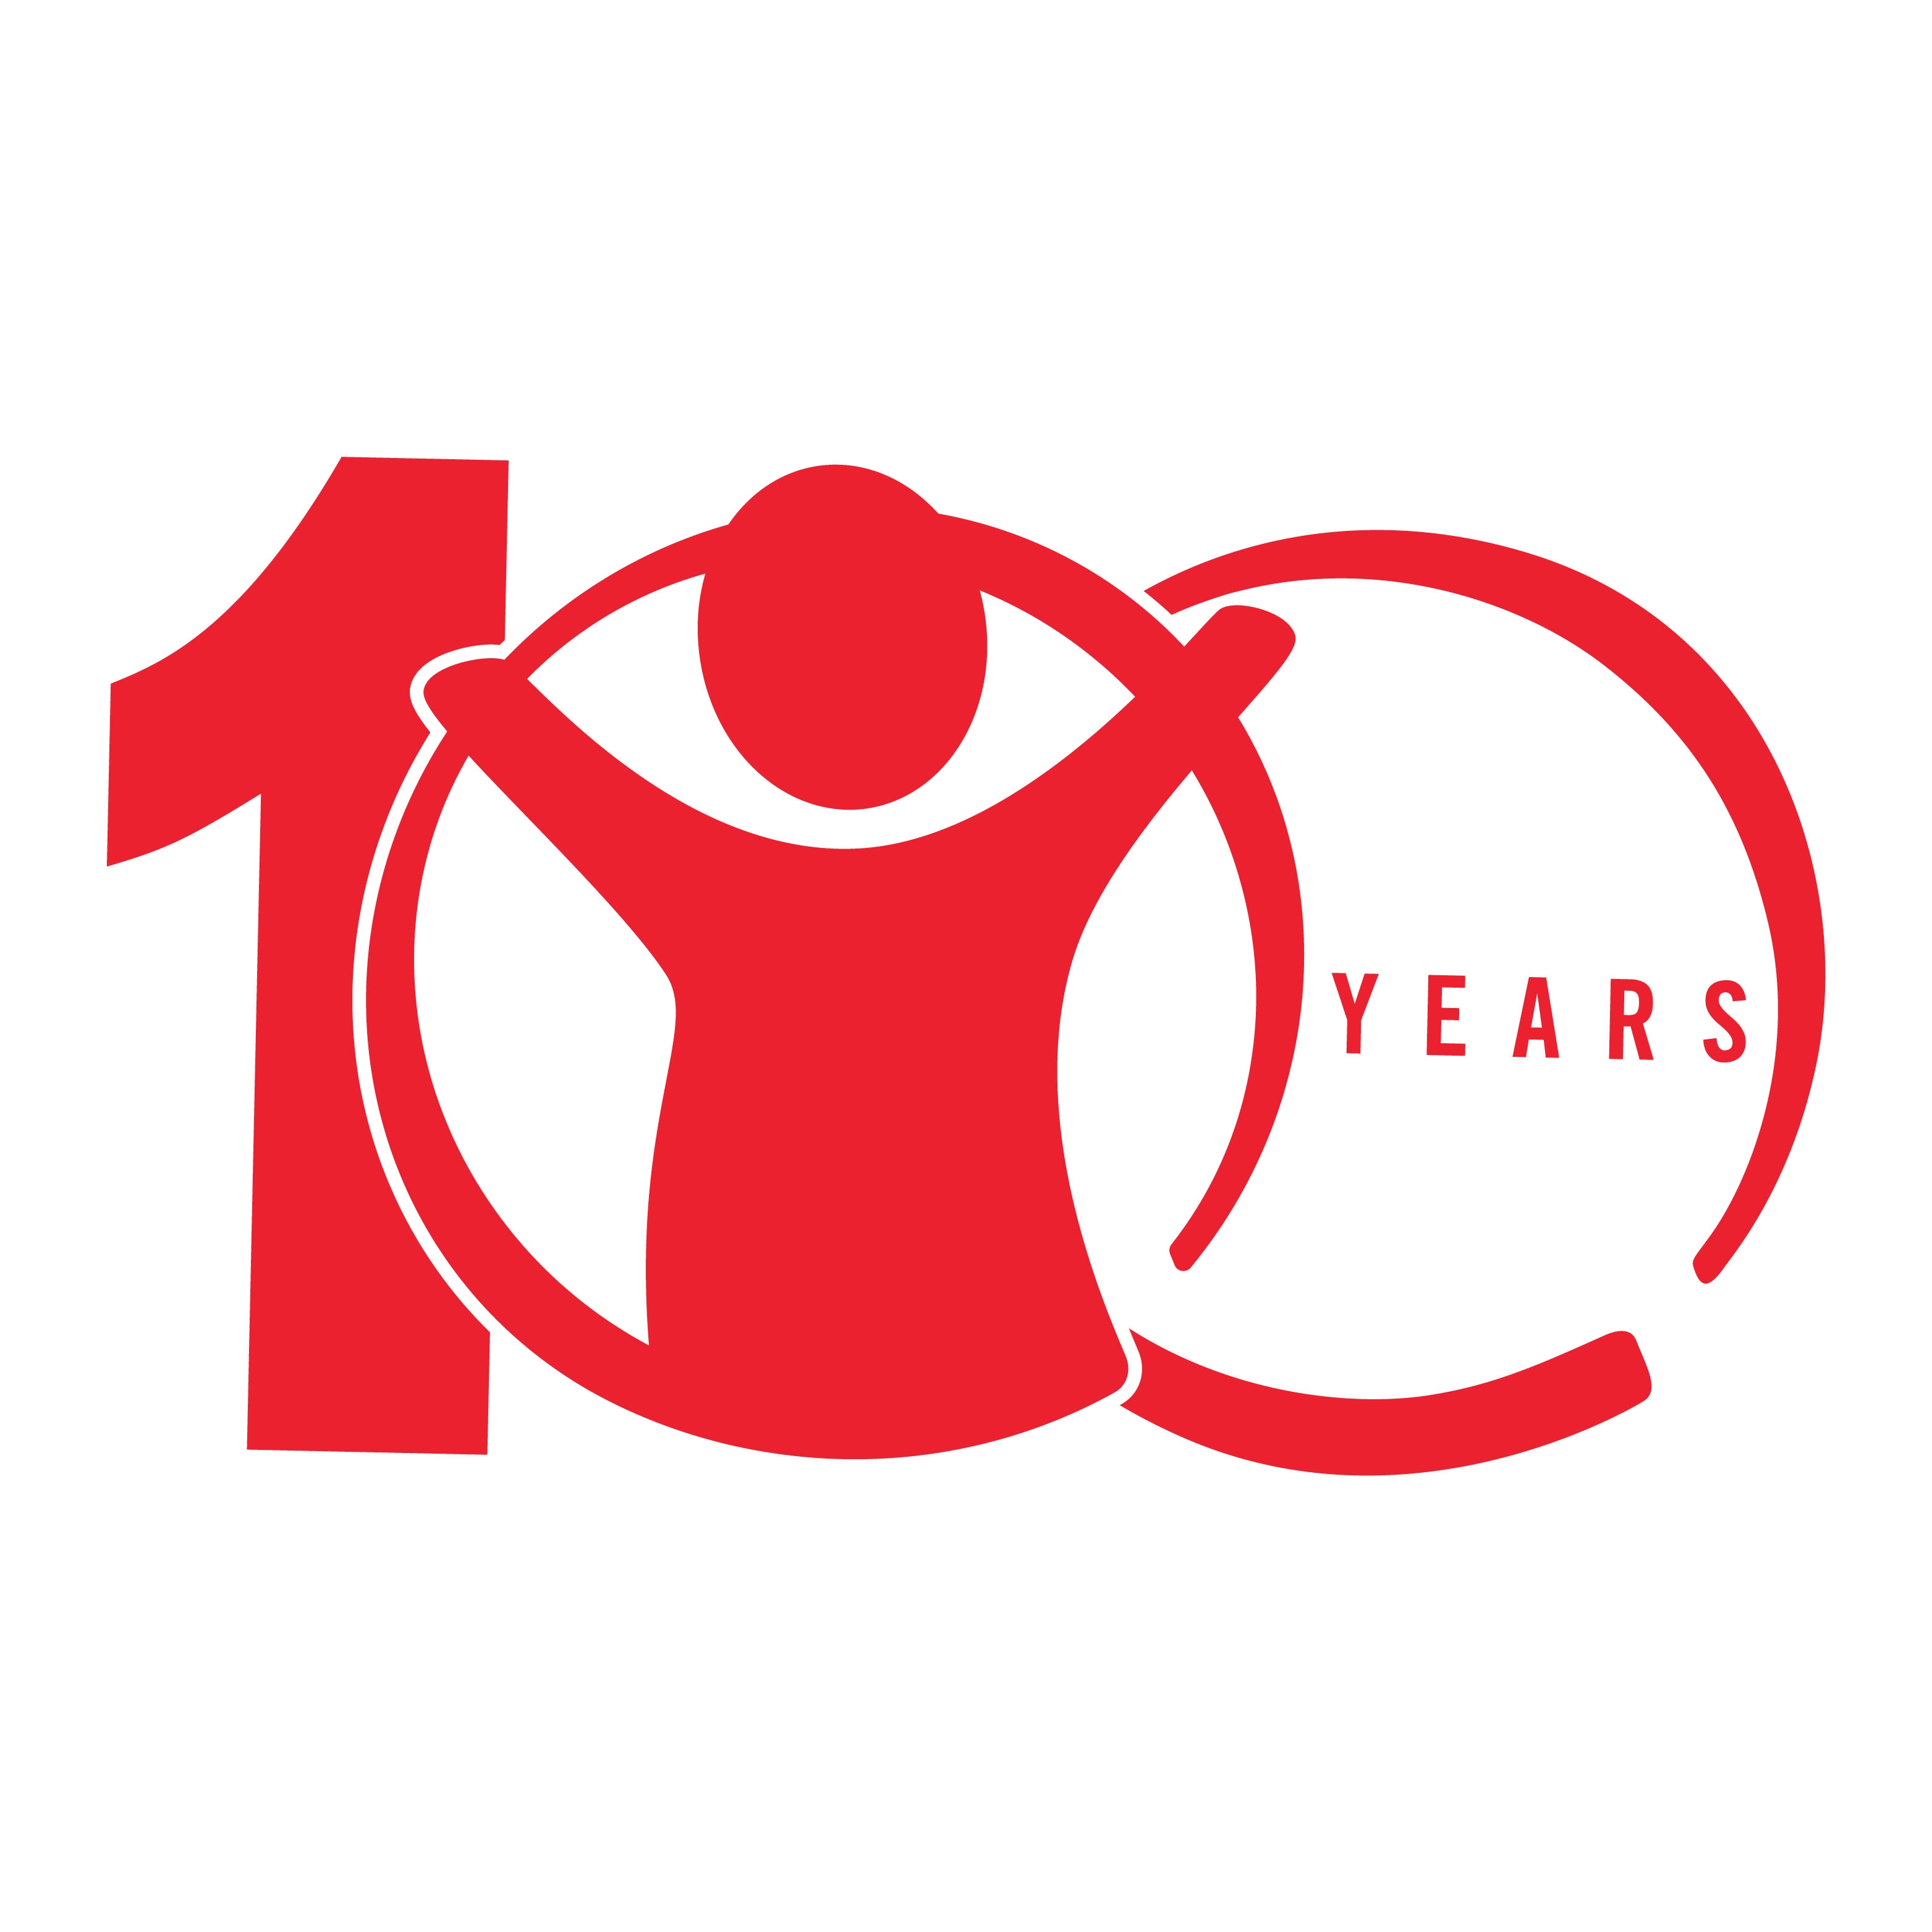 Save the children centennial graphic. Since our founding in 1919, we’ve changed the lives of more than 1 billion children.